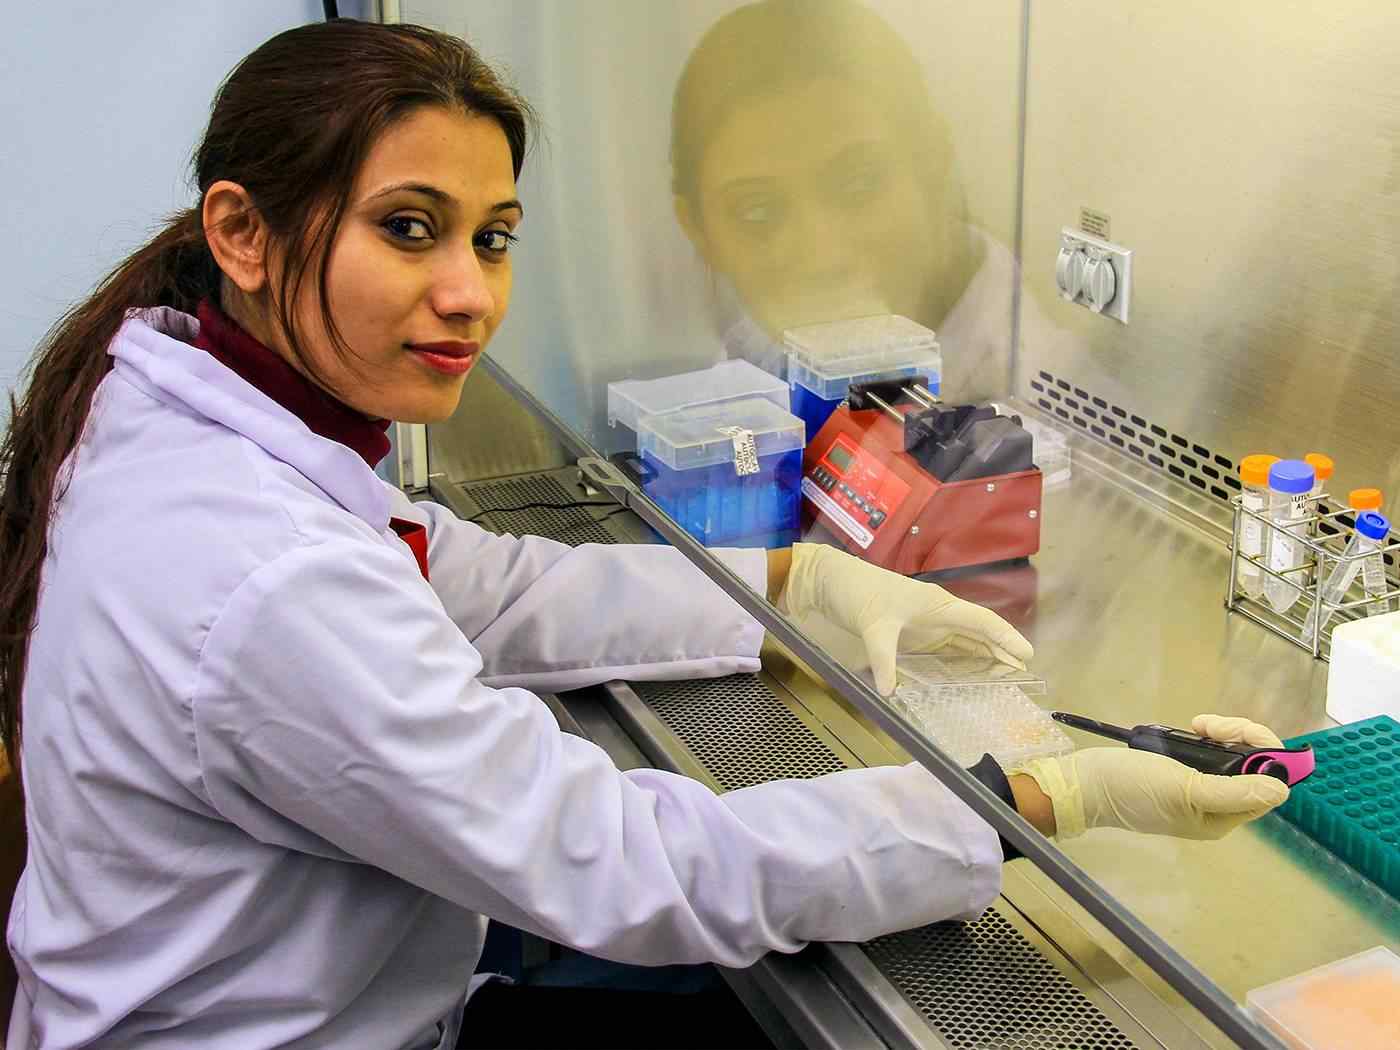 A student prepares samples in a lab